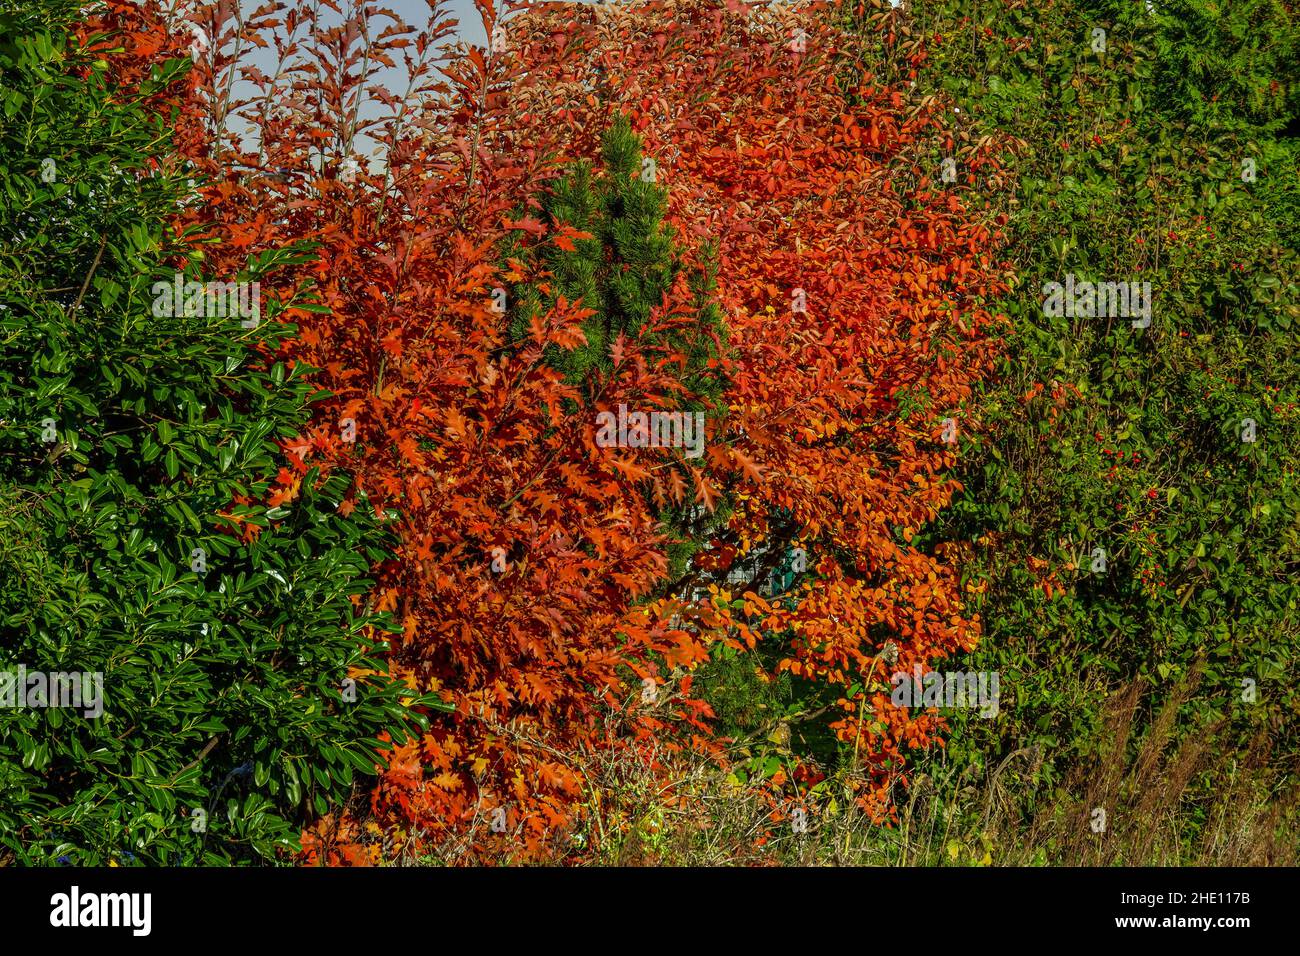 Beautiful view of red leaves on a bush with green foliage that grows around the fence like a hedge Stock Photo